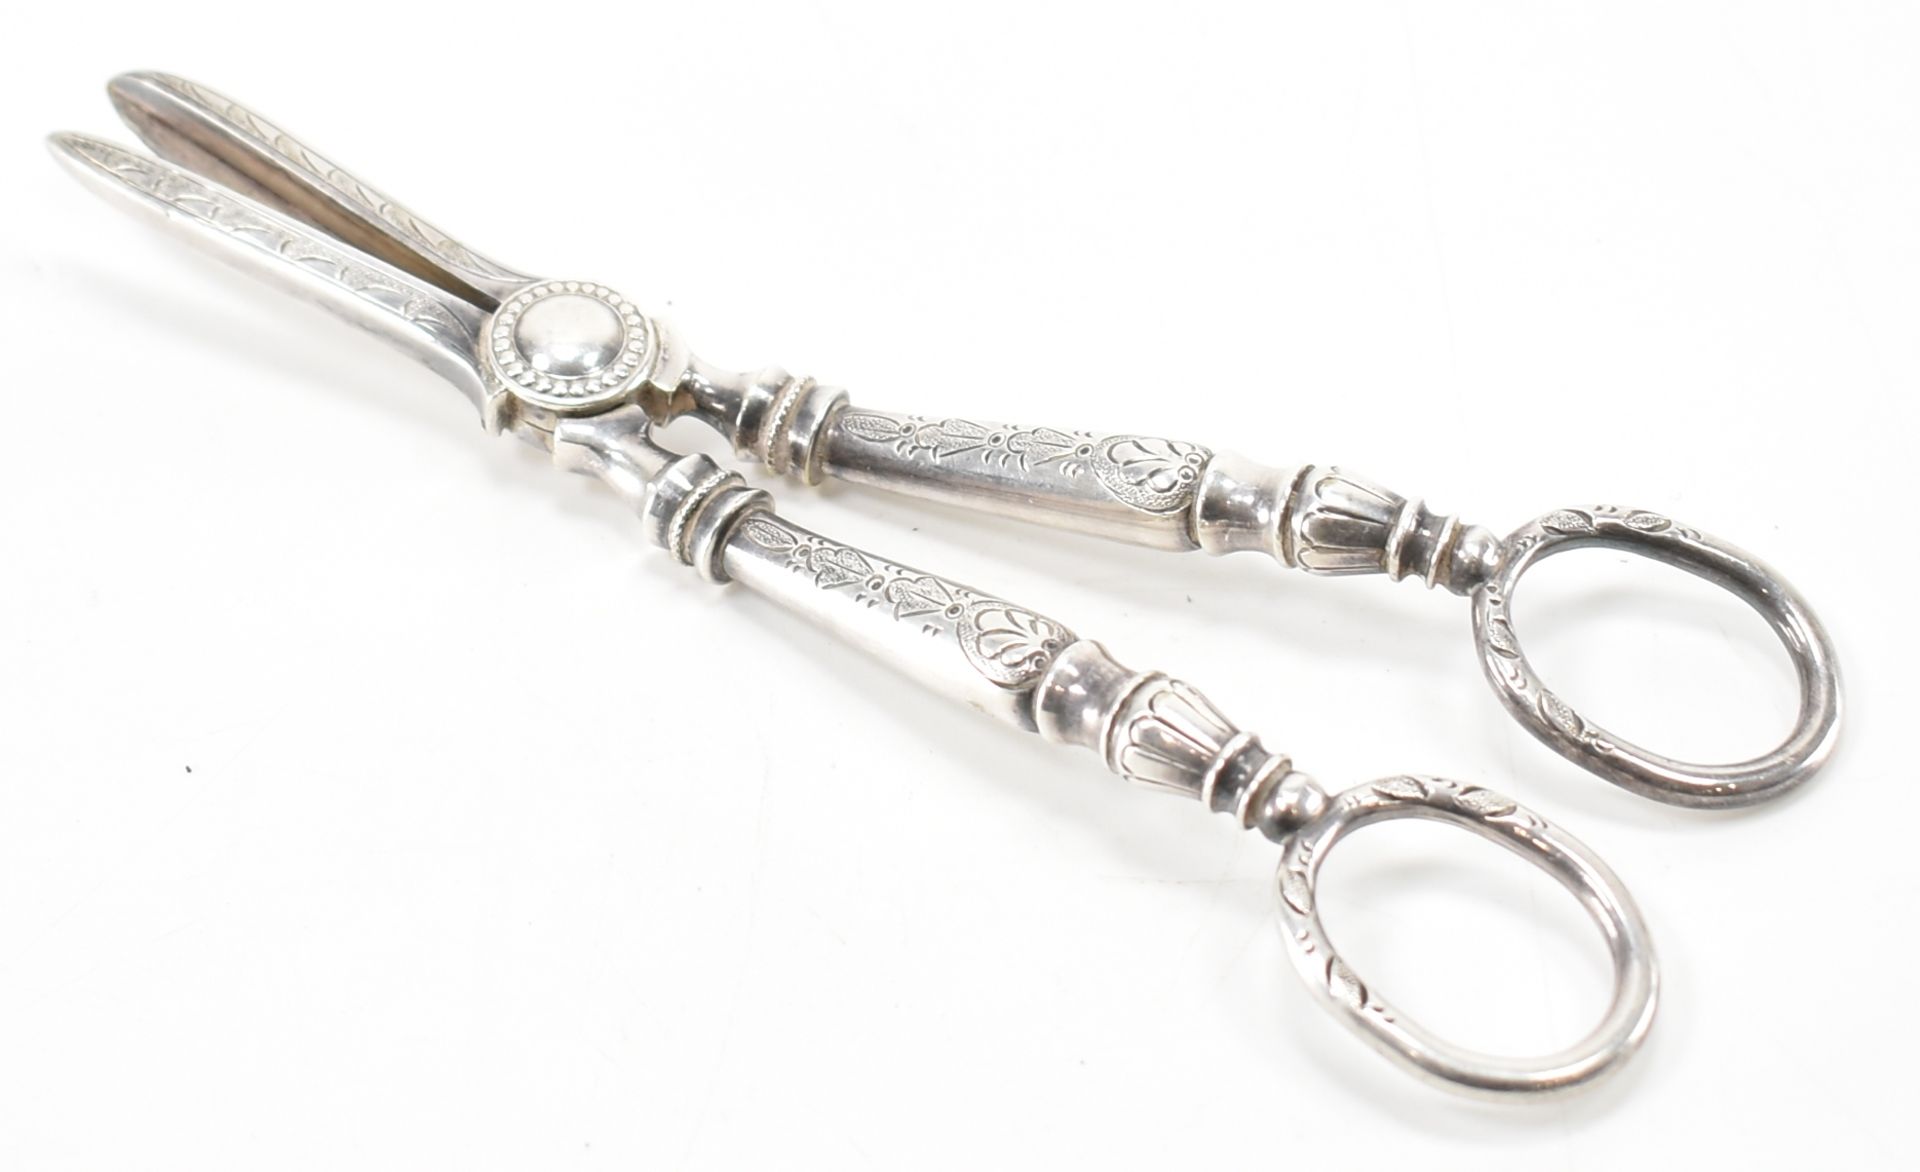 SILVER 90 MARKED TAPERING RING STAND & PLATE GRAPE SCISSORS - Image 4 of 5